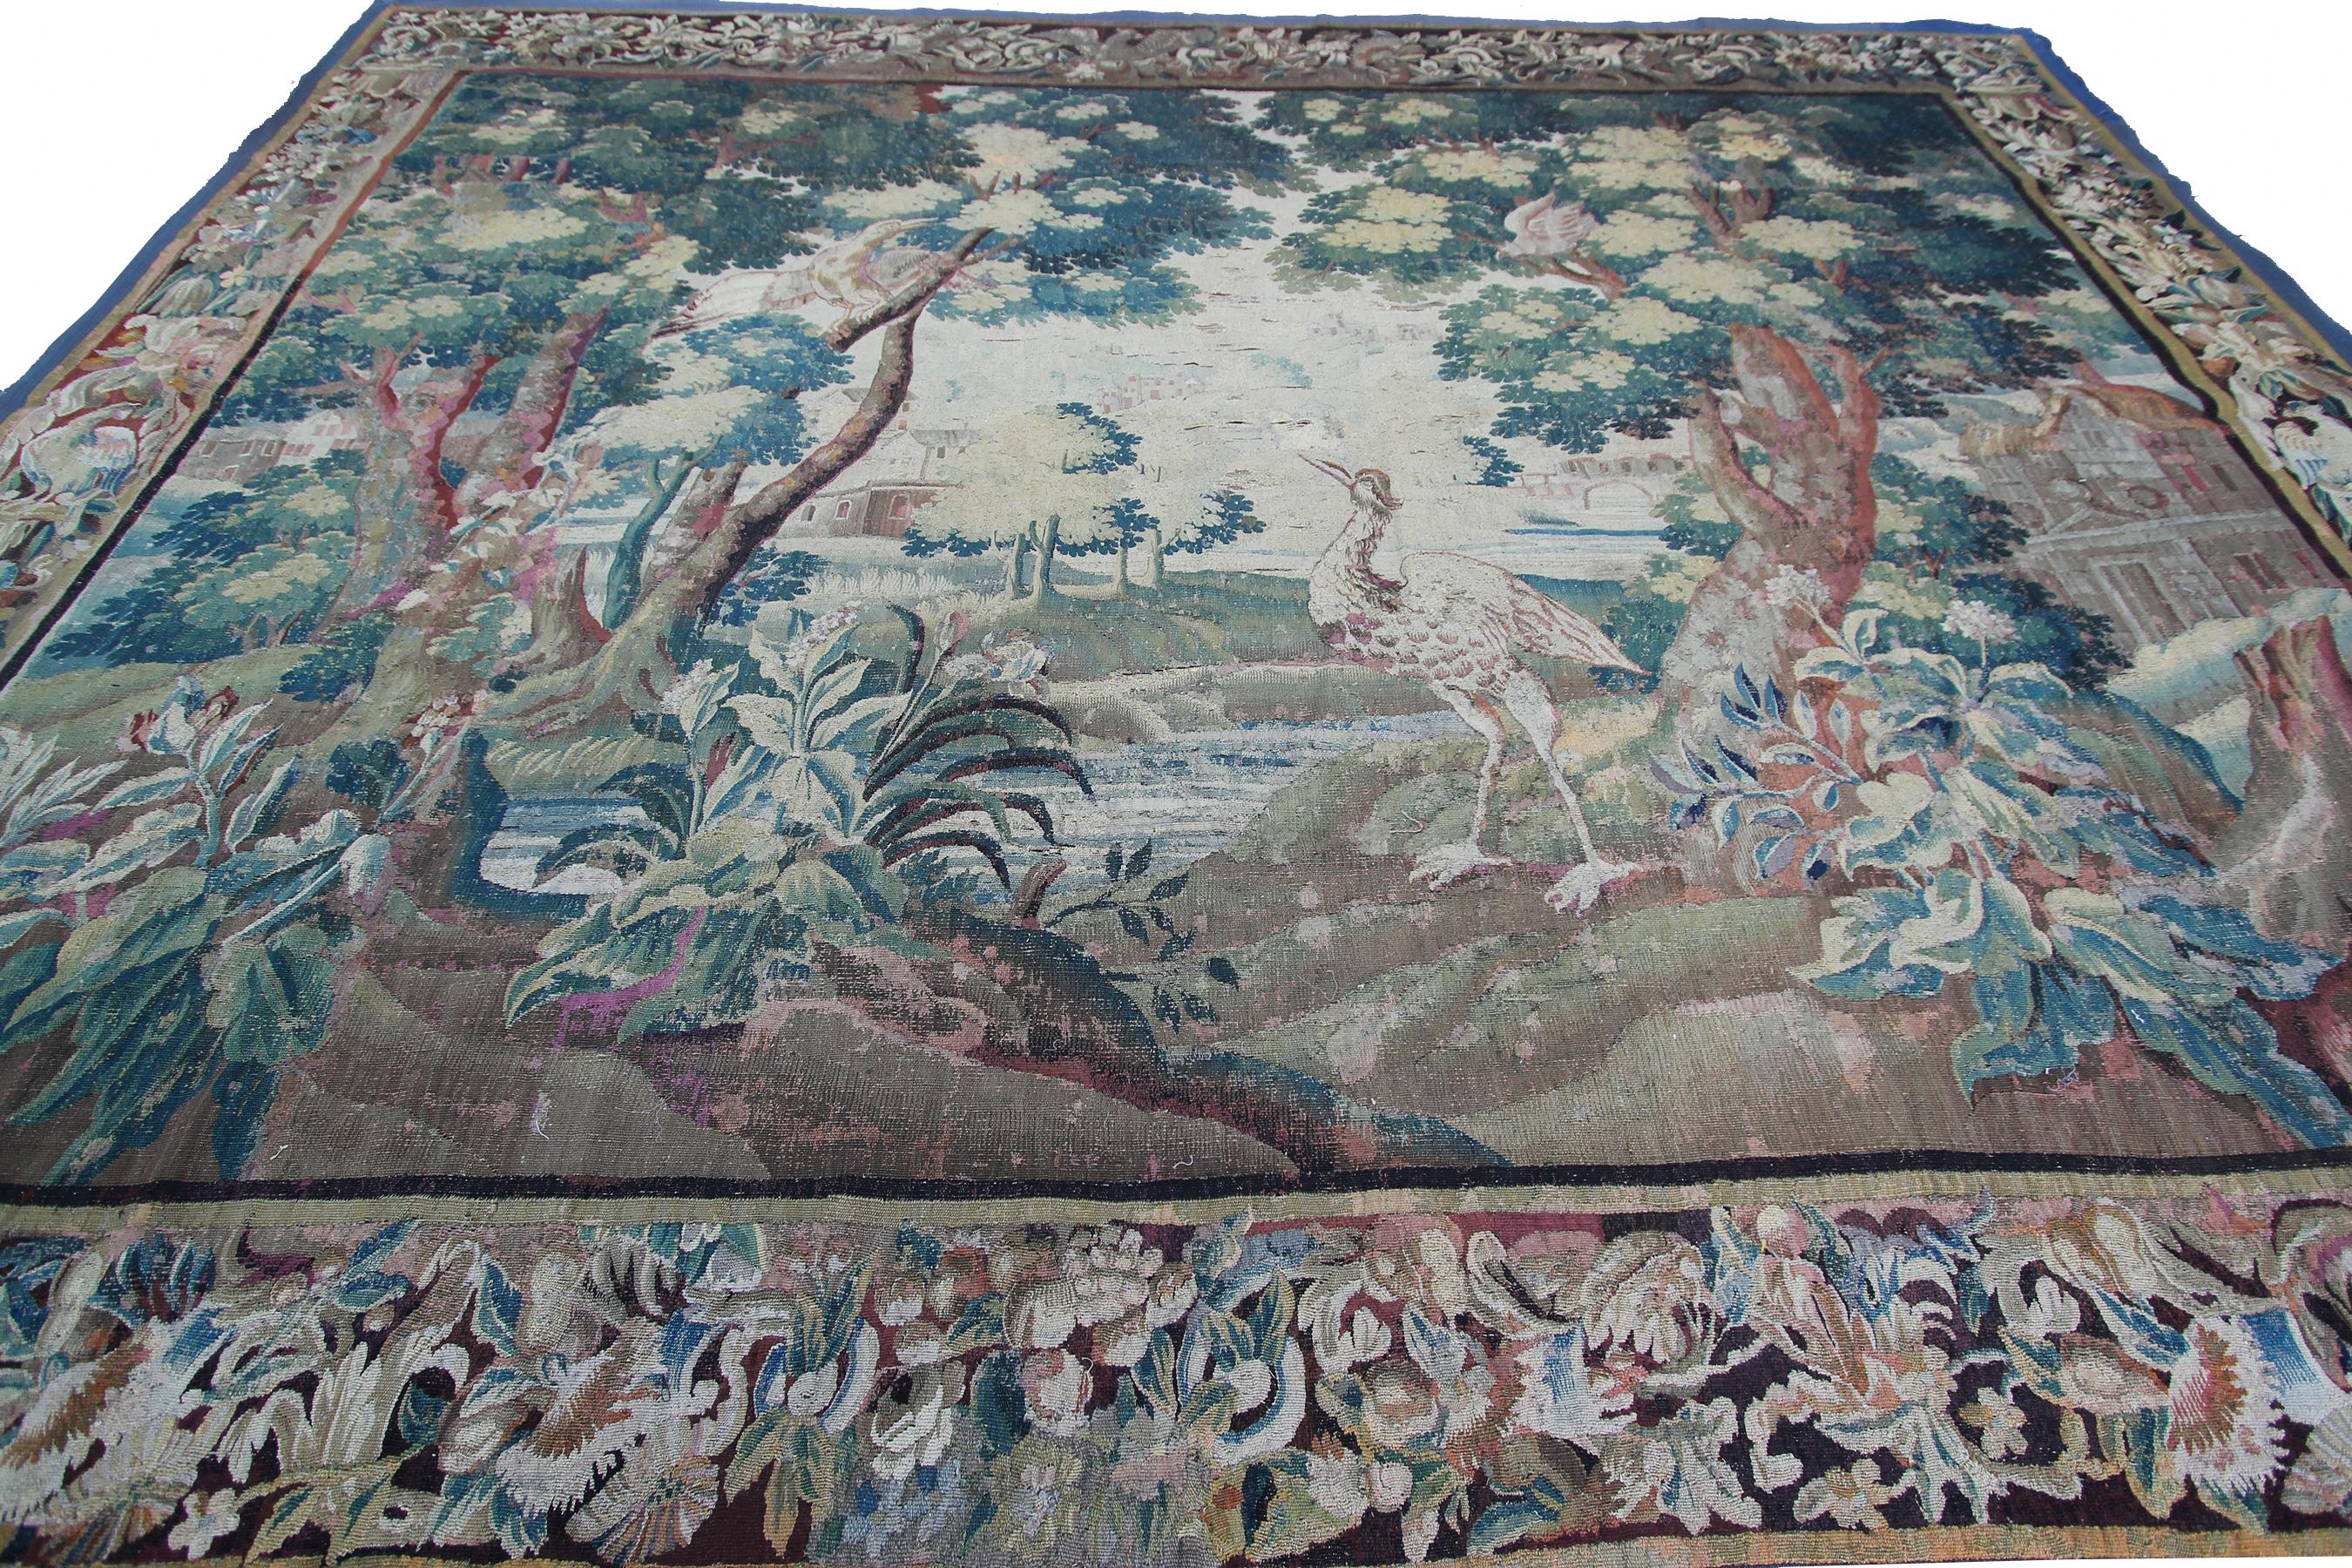 Hand-Woven Early 18th century Flemish antique tapestry 10x13 Verdure Wool & Silk 297x384cm For Sale